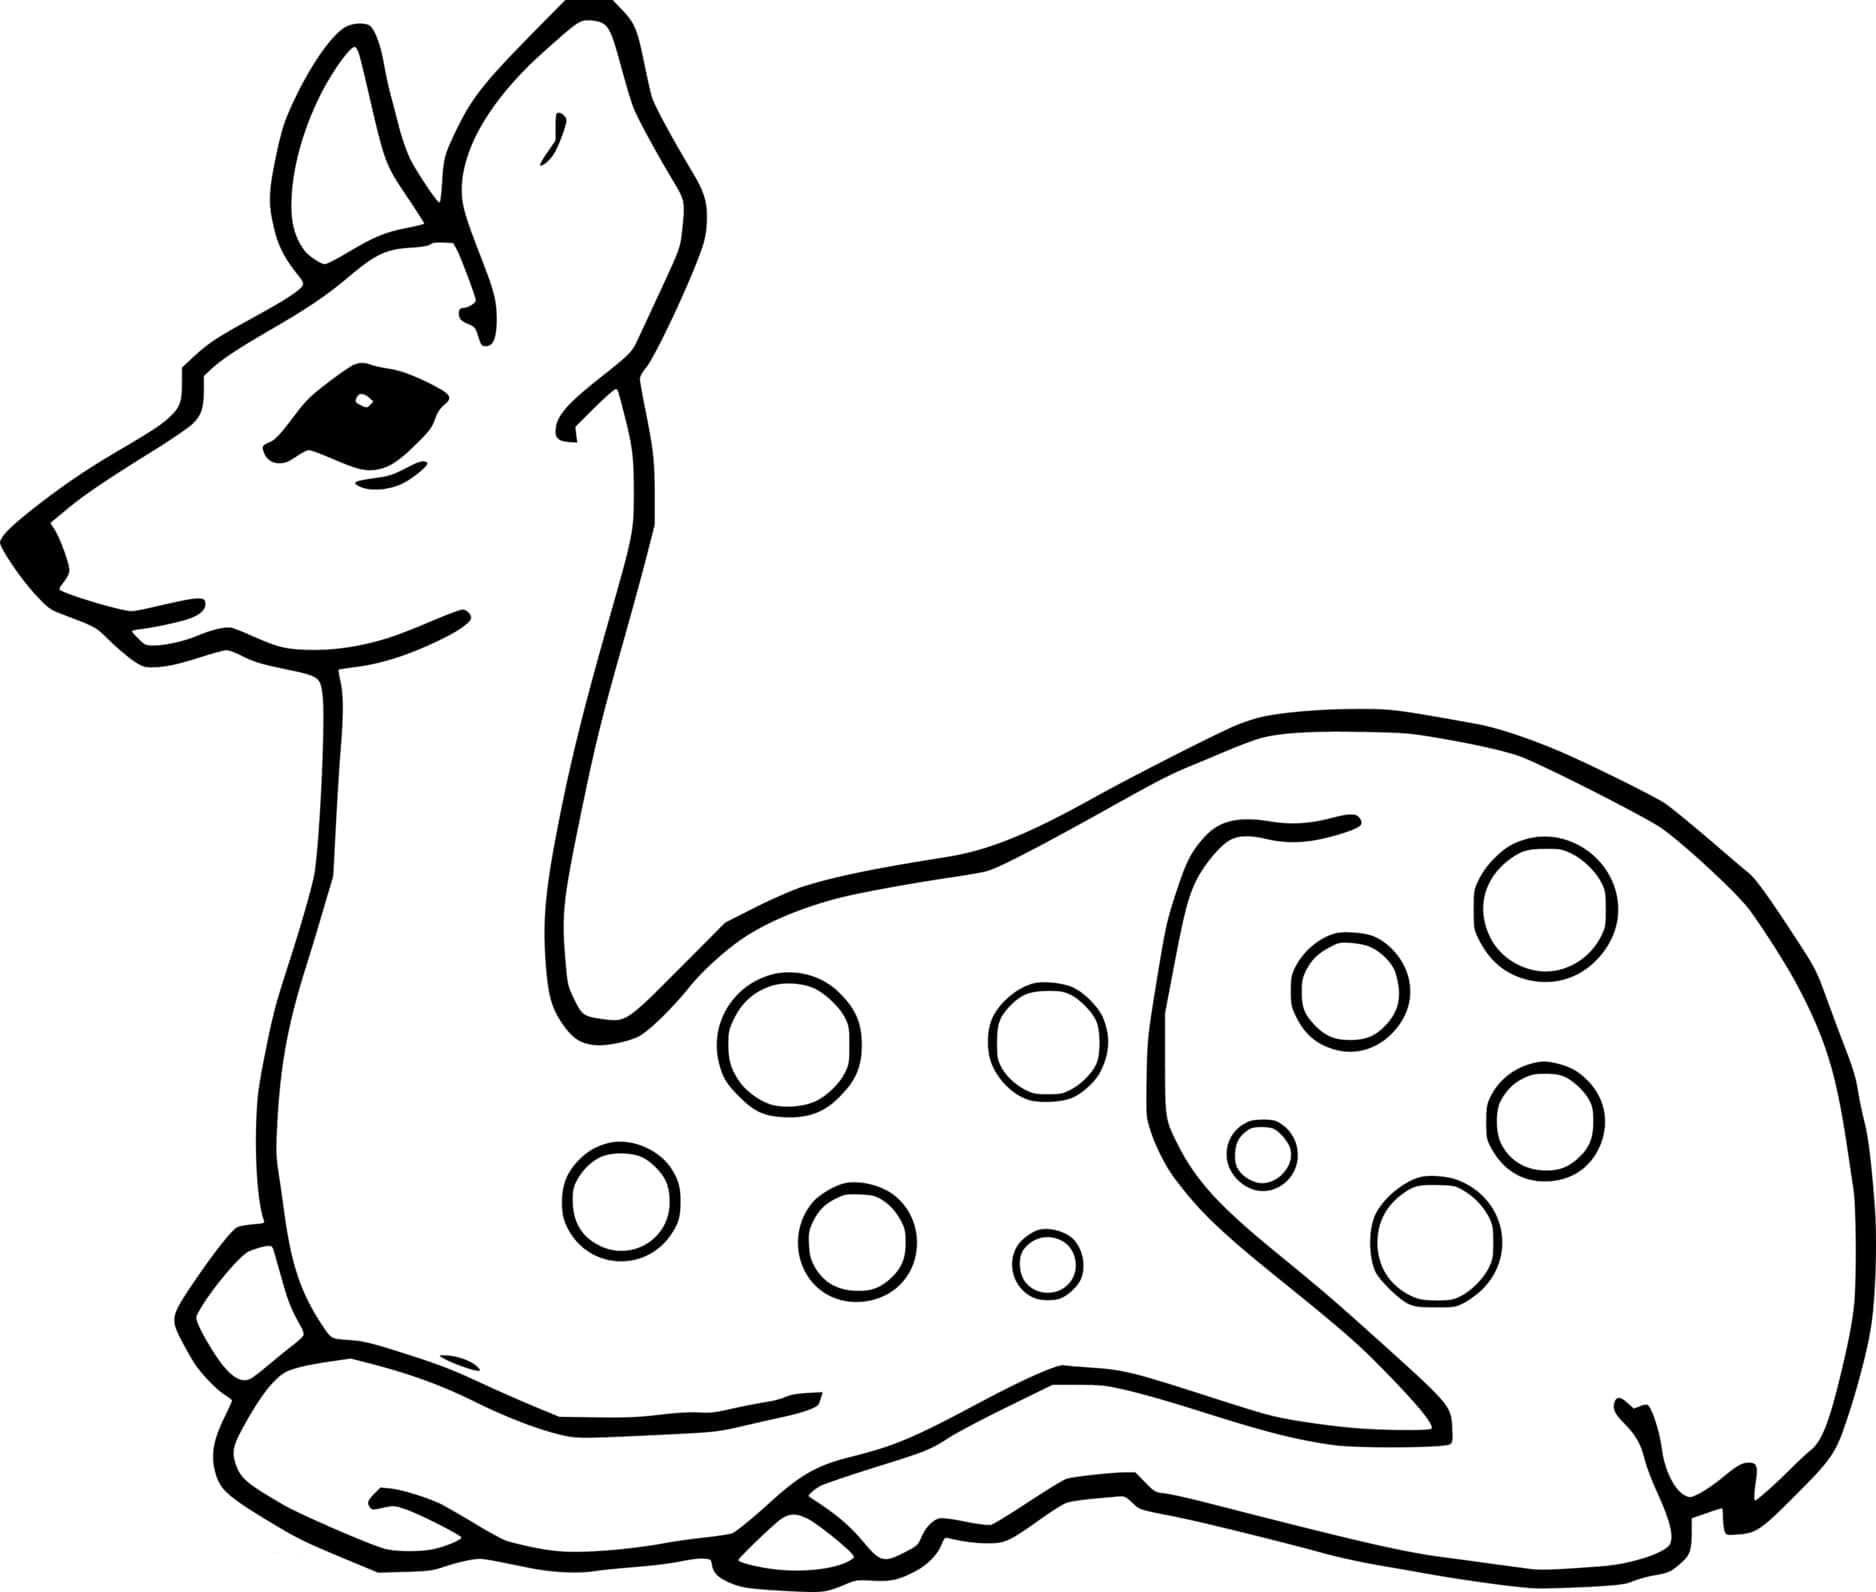 Spotted Deer On The Ground Coloring Page